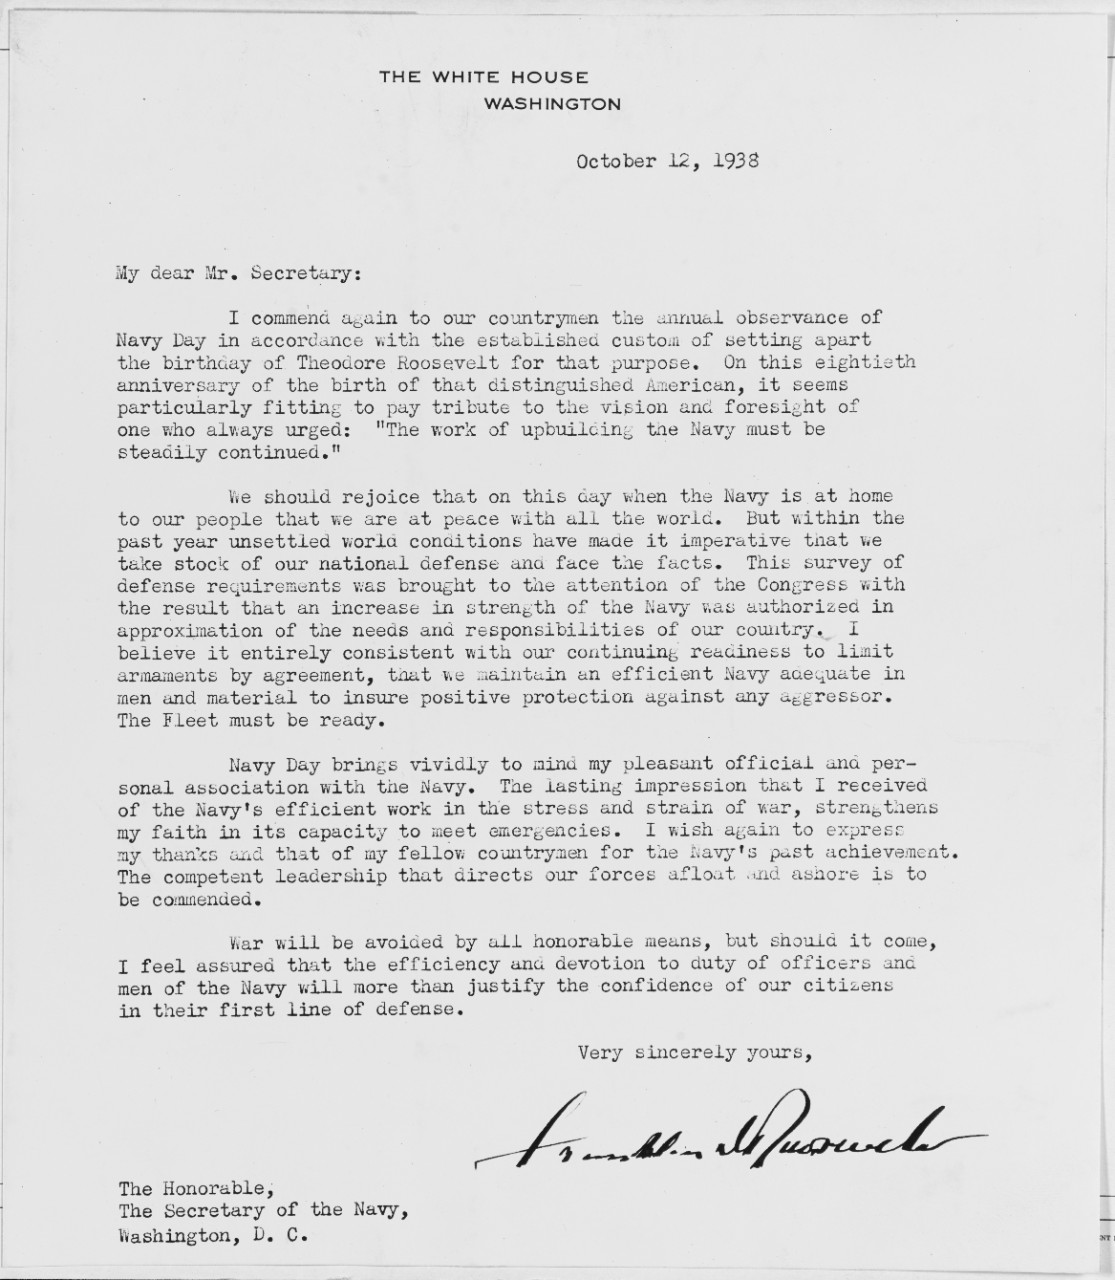 Letter from Franklin D. Roosevelt to Claude Swanson, 1938